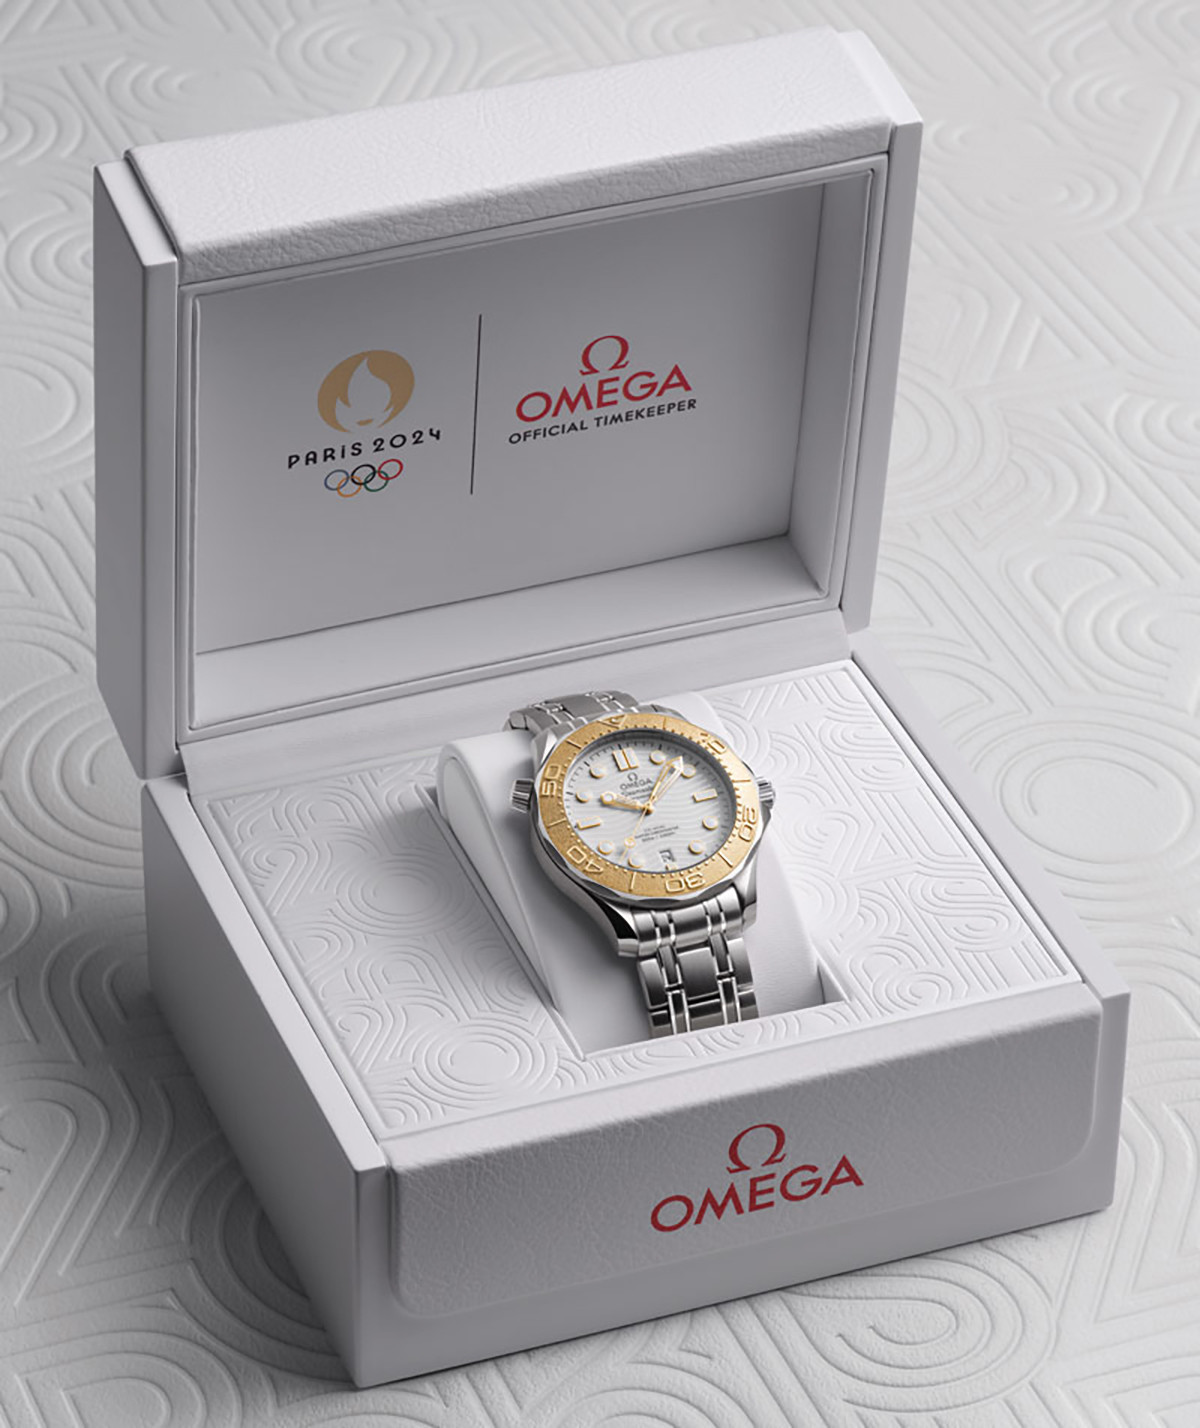 Omega releases £8,000 limited edition watch for Paris 2024